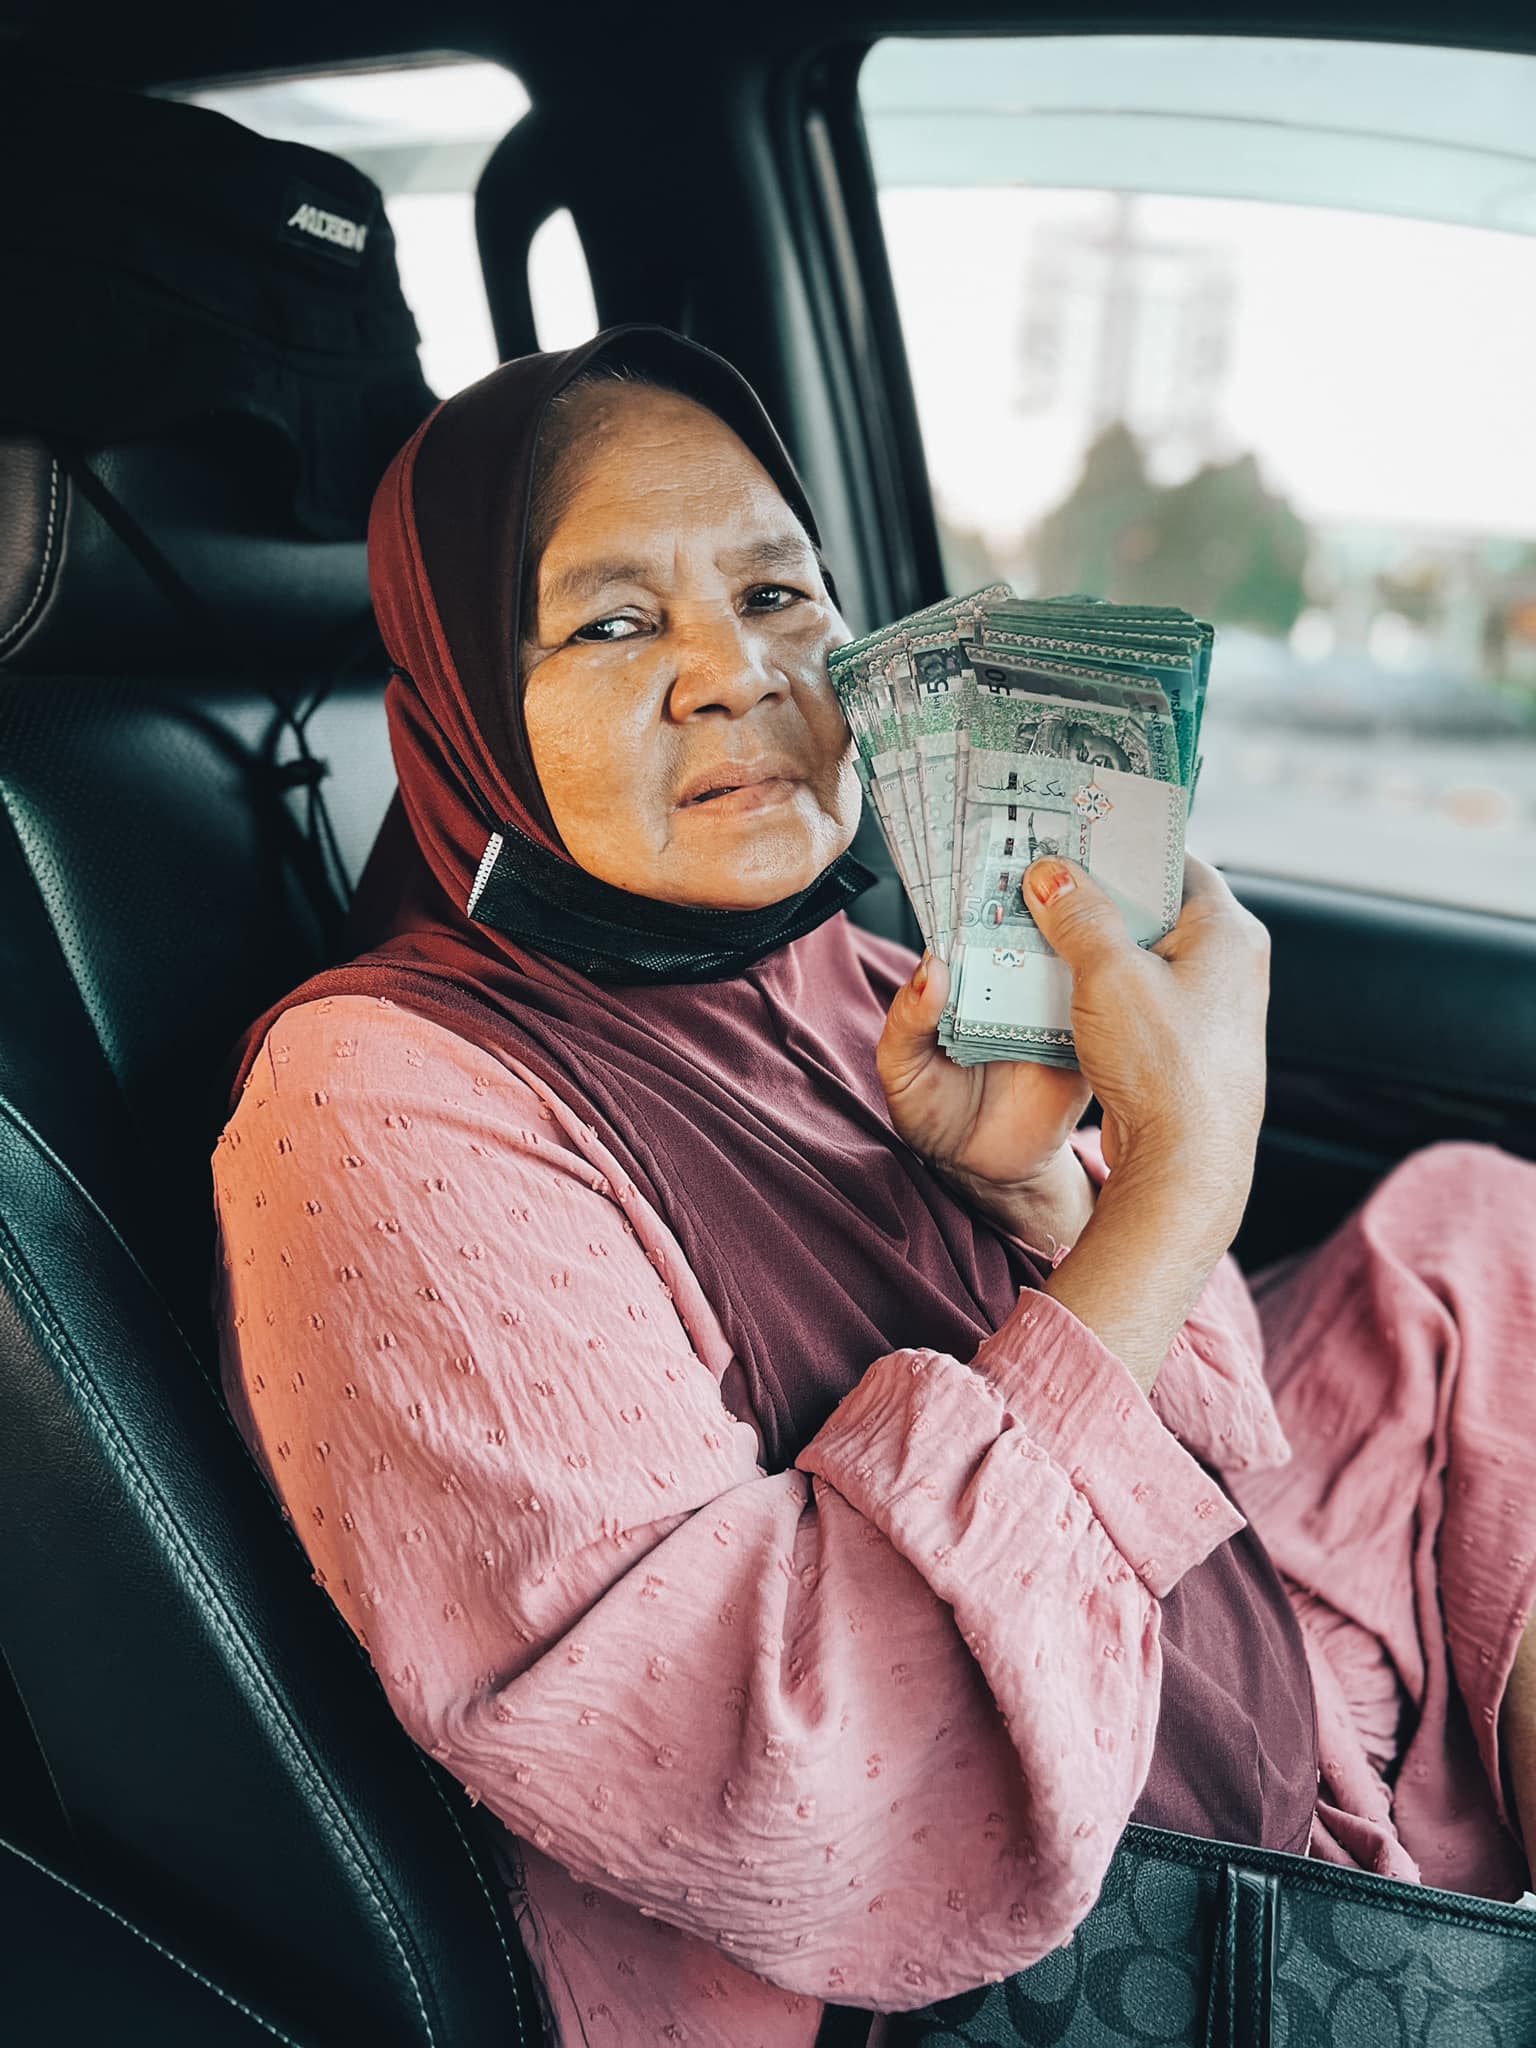 Amran gifting his mother RM10,000 from his own EPF savings, as a show of filial piety and devotion. Source: Amran X Aminudin